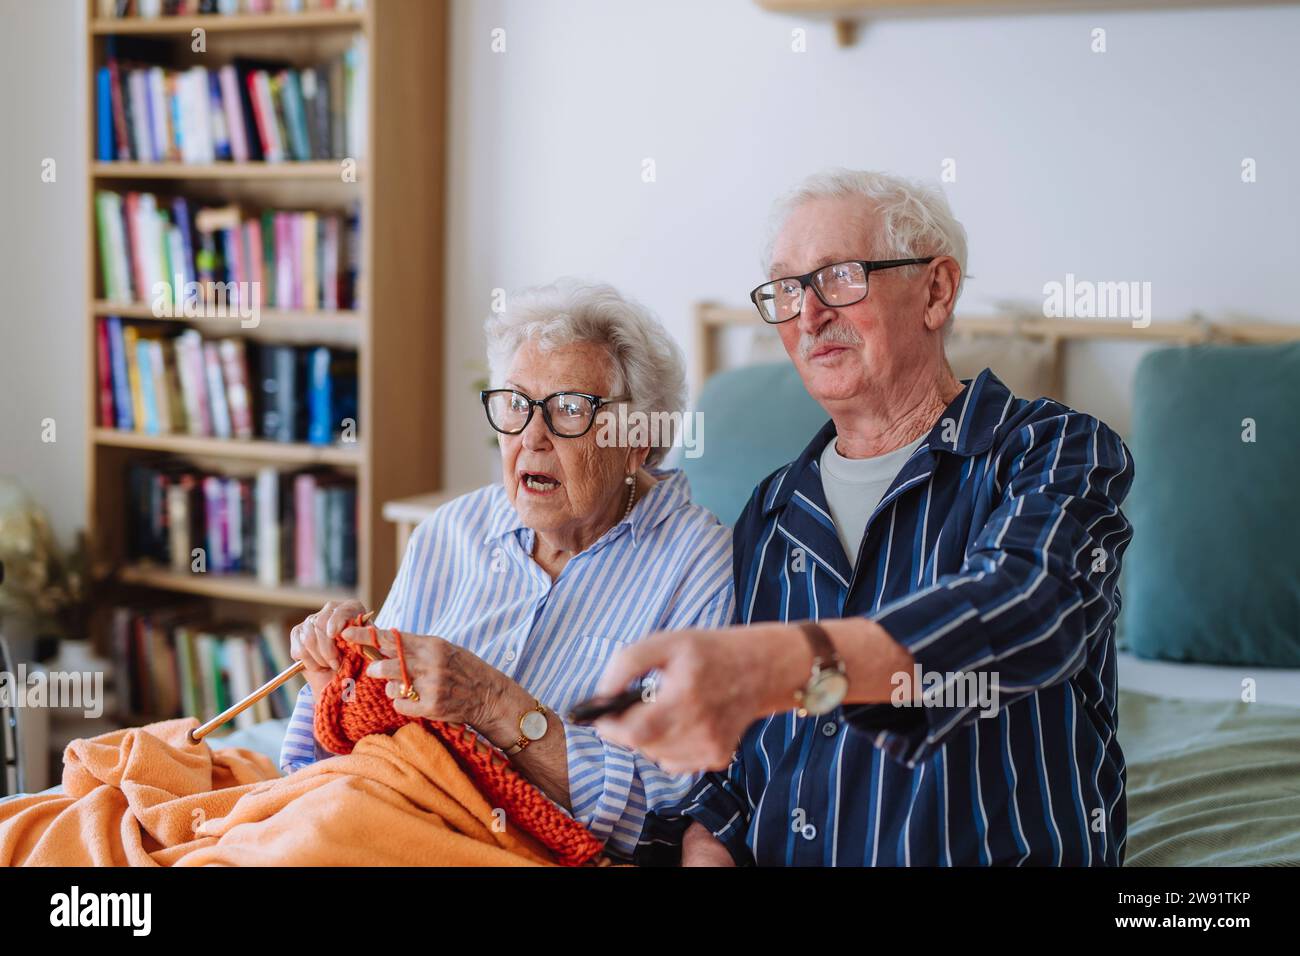 Senior woman knitting with man holding remote and watching TV at home Stock Photo